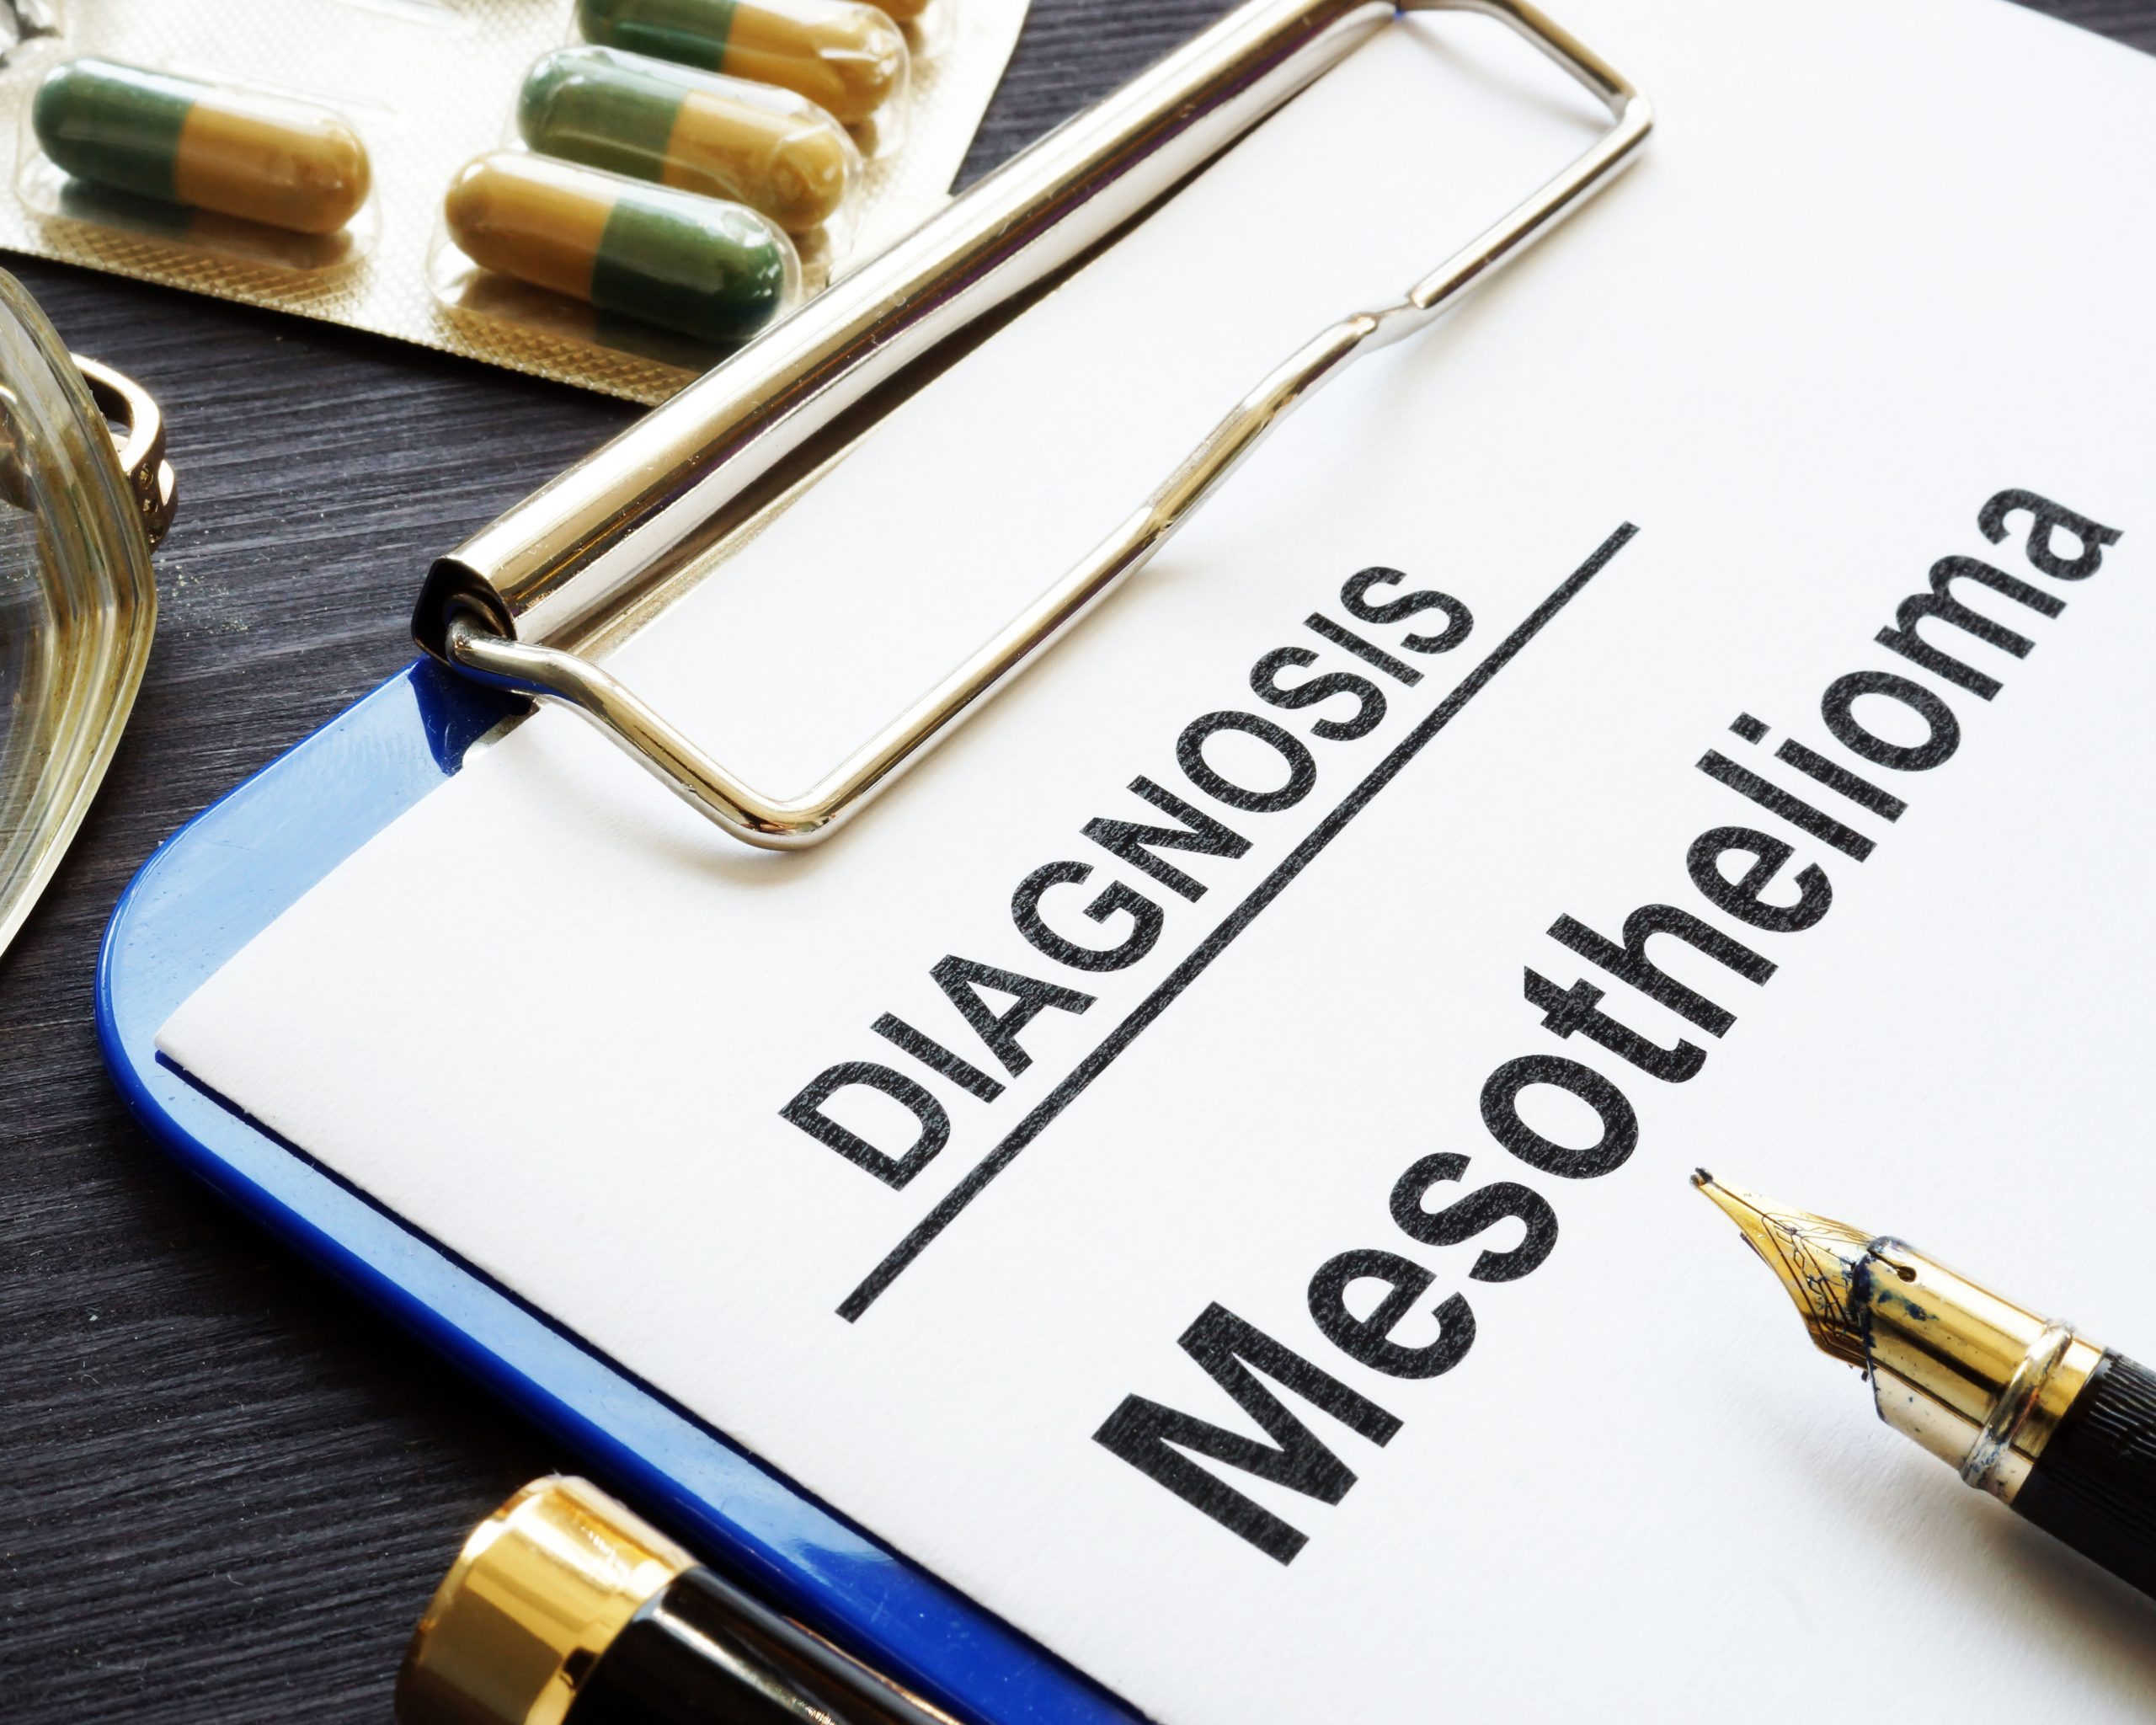 A positive mesothelioma diagnosis prompts assistance from a professional mesothelioma lawyer.